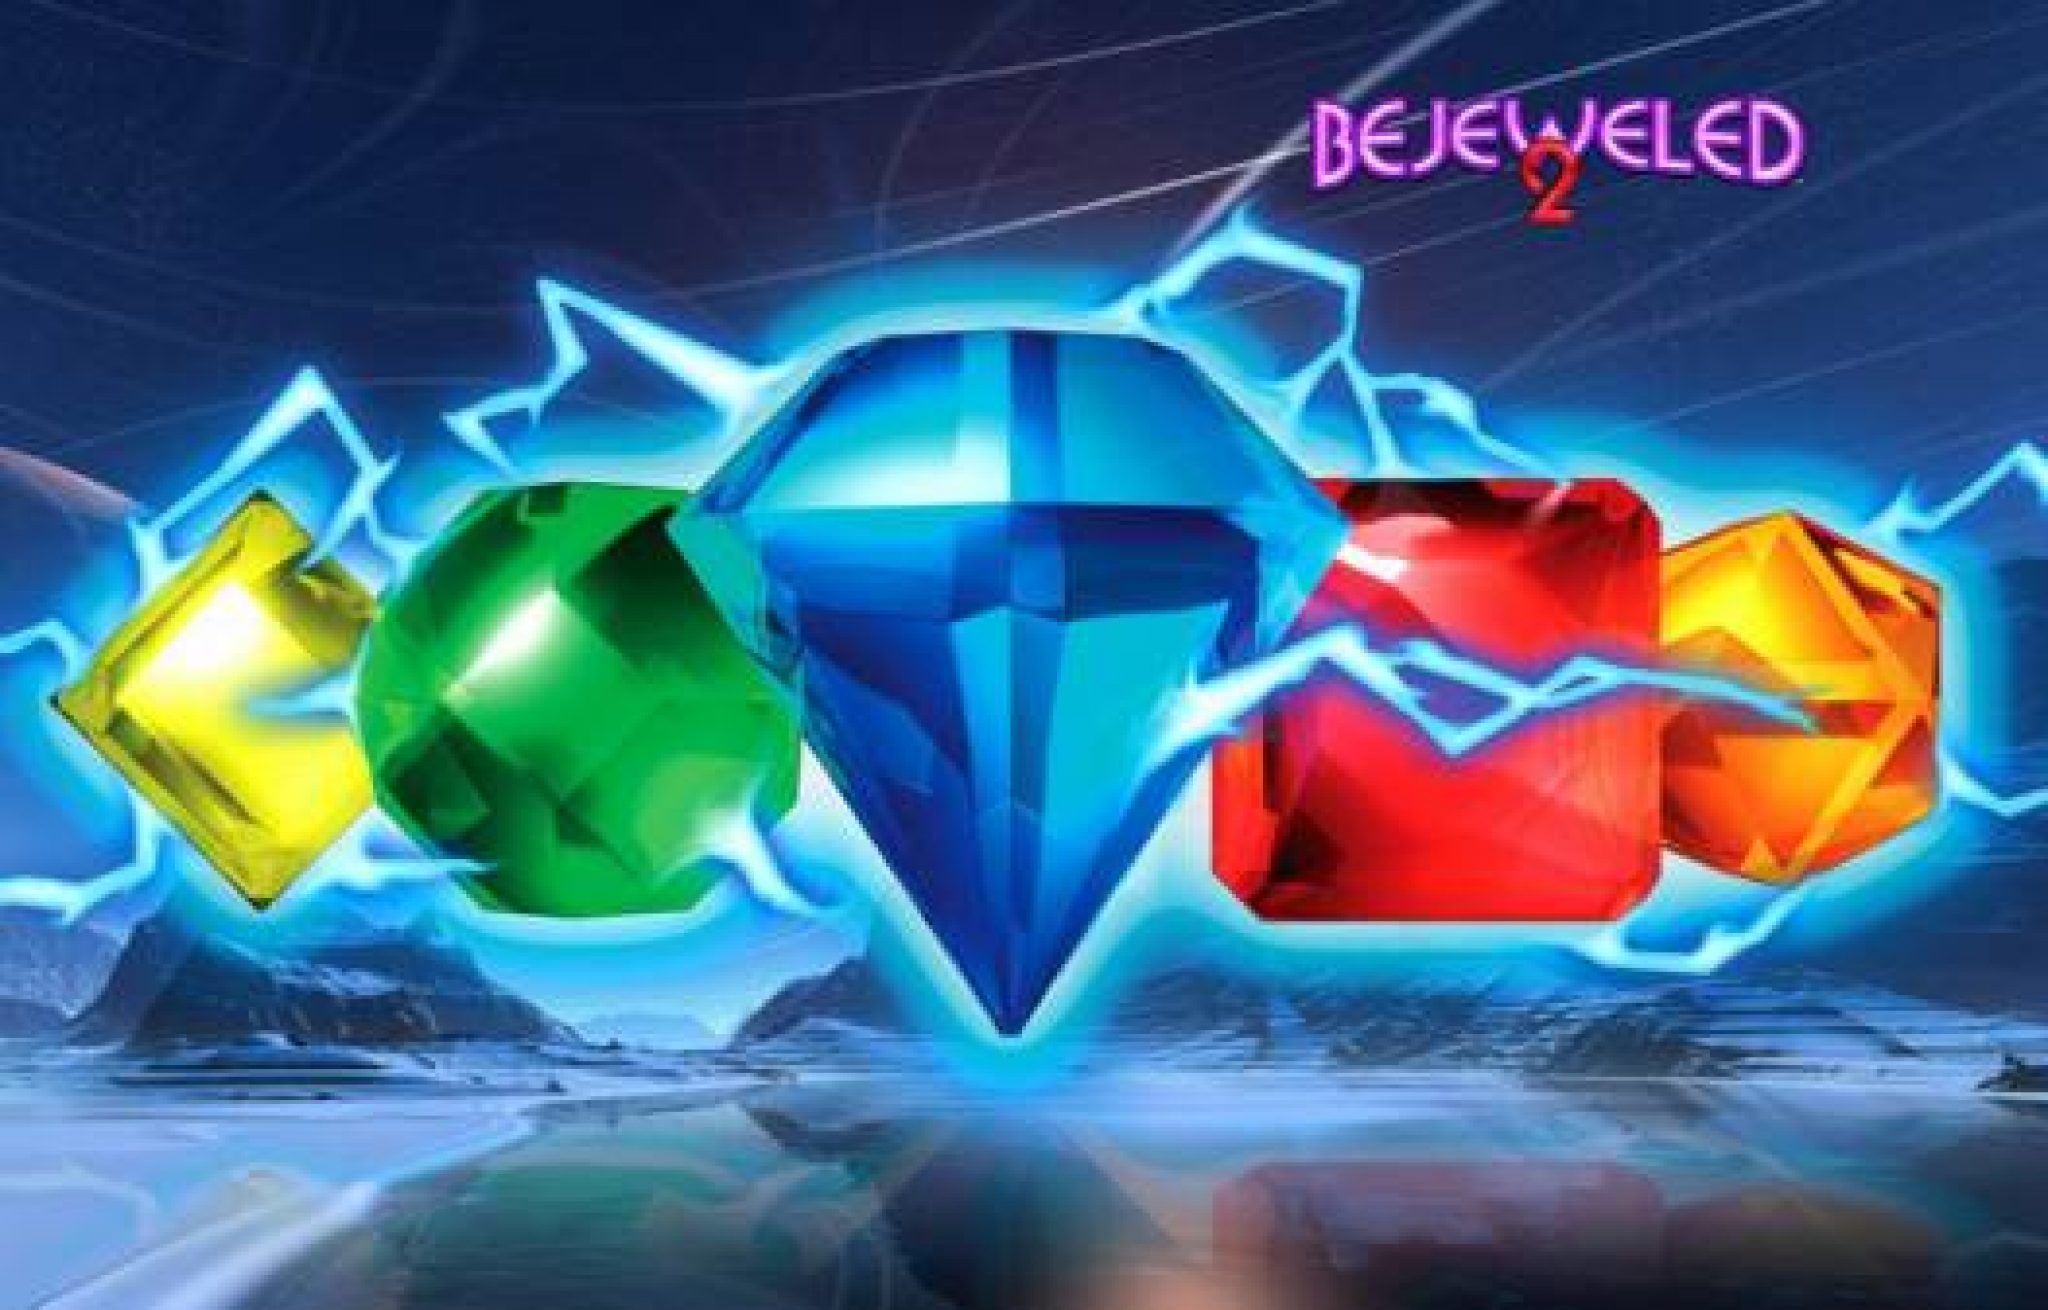 download bejeweled 2 full pc version free